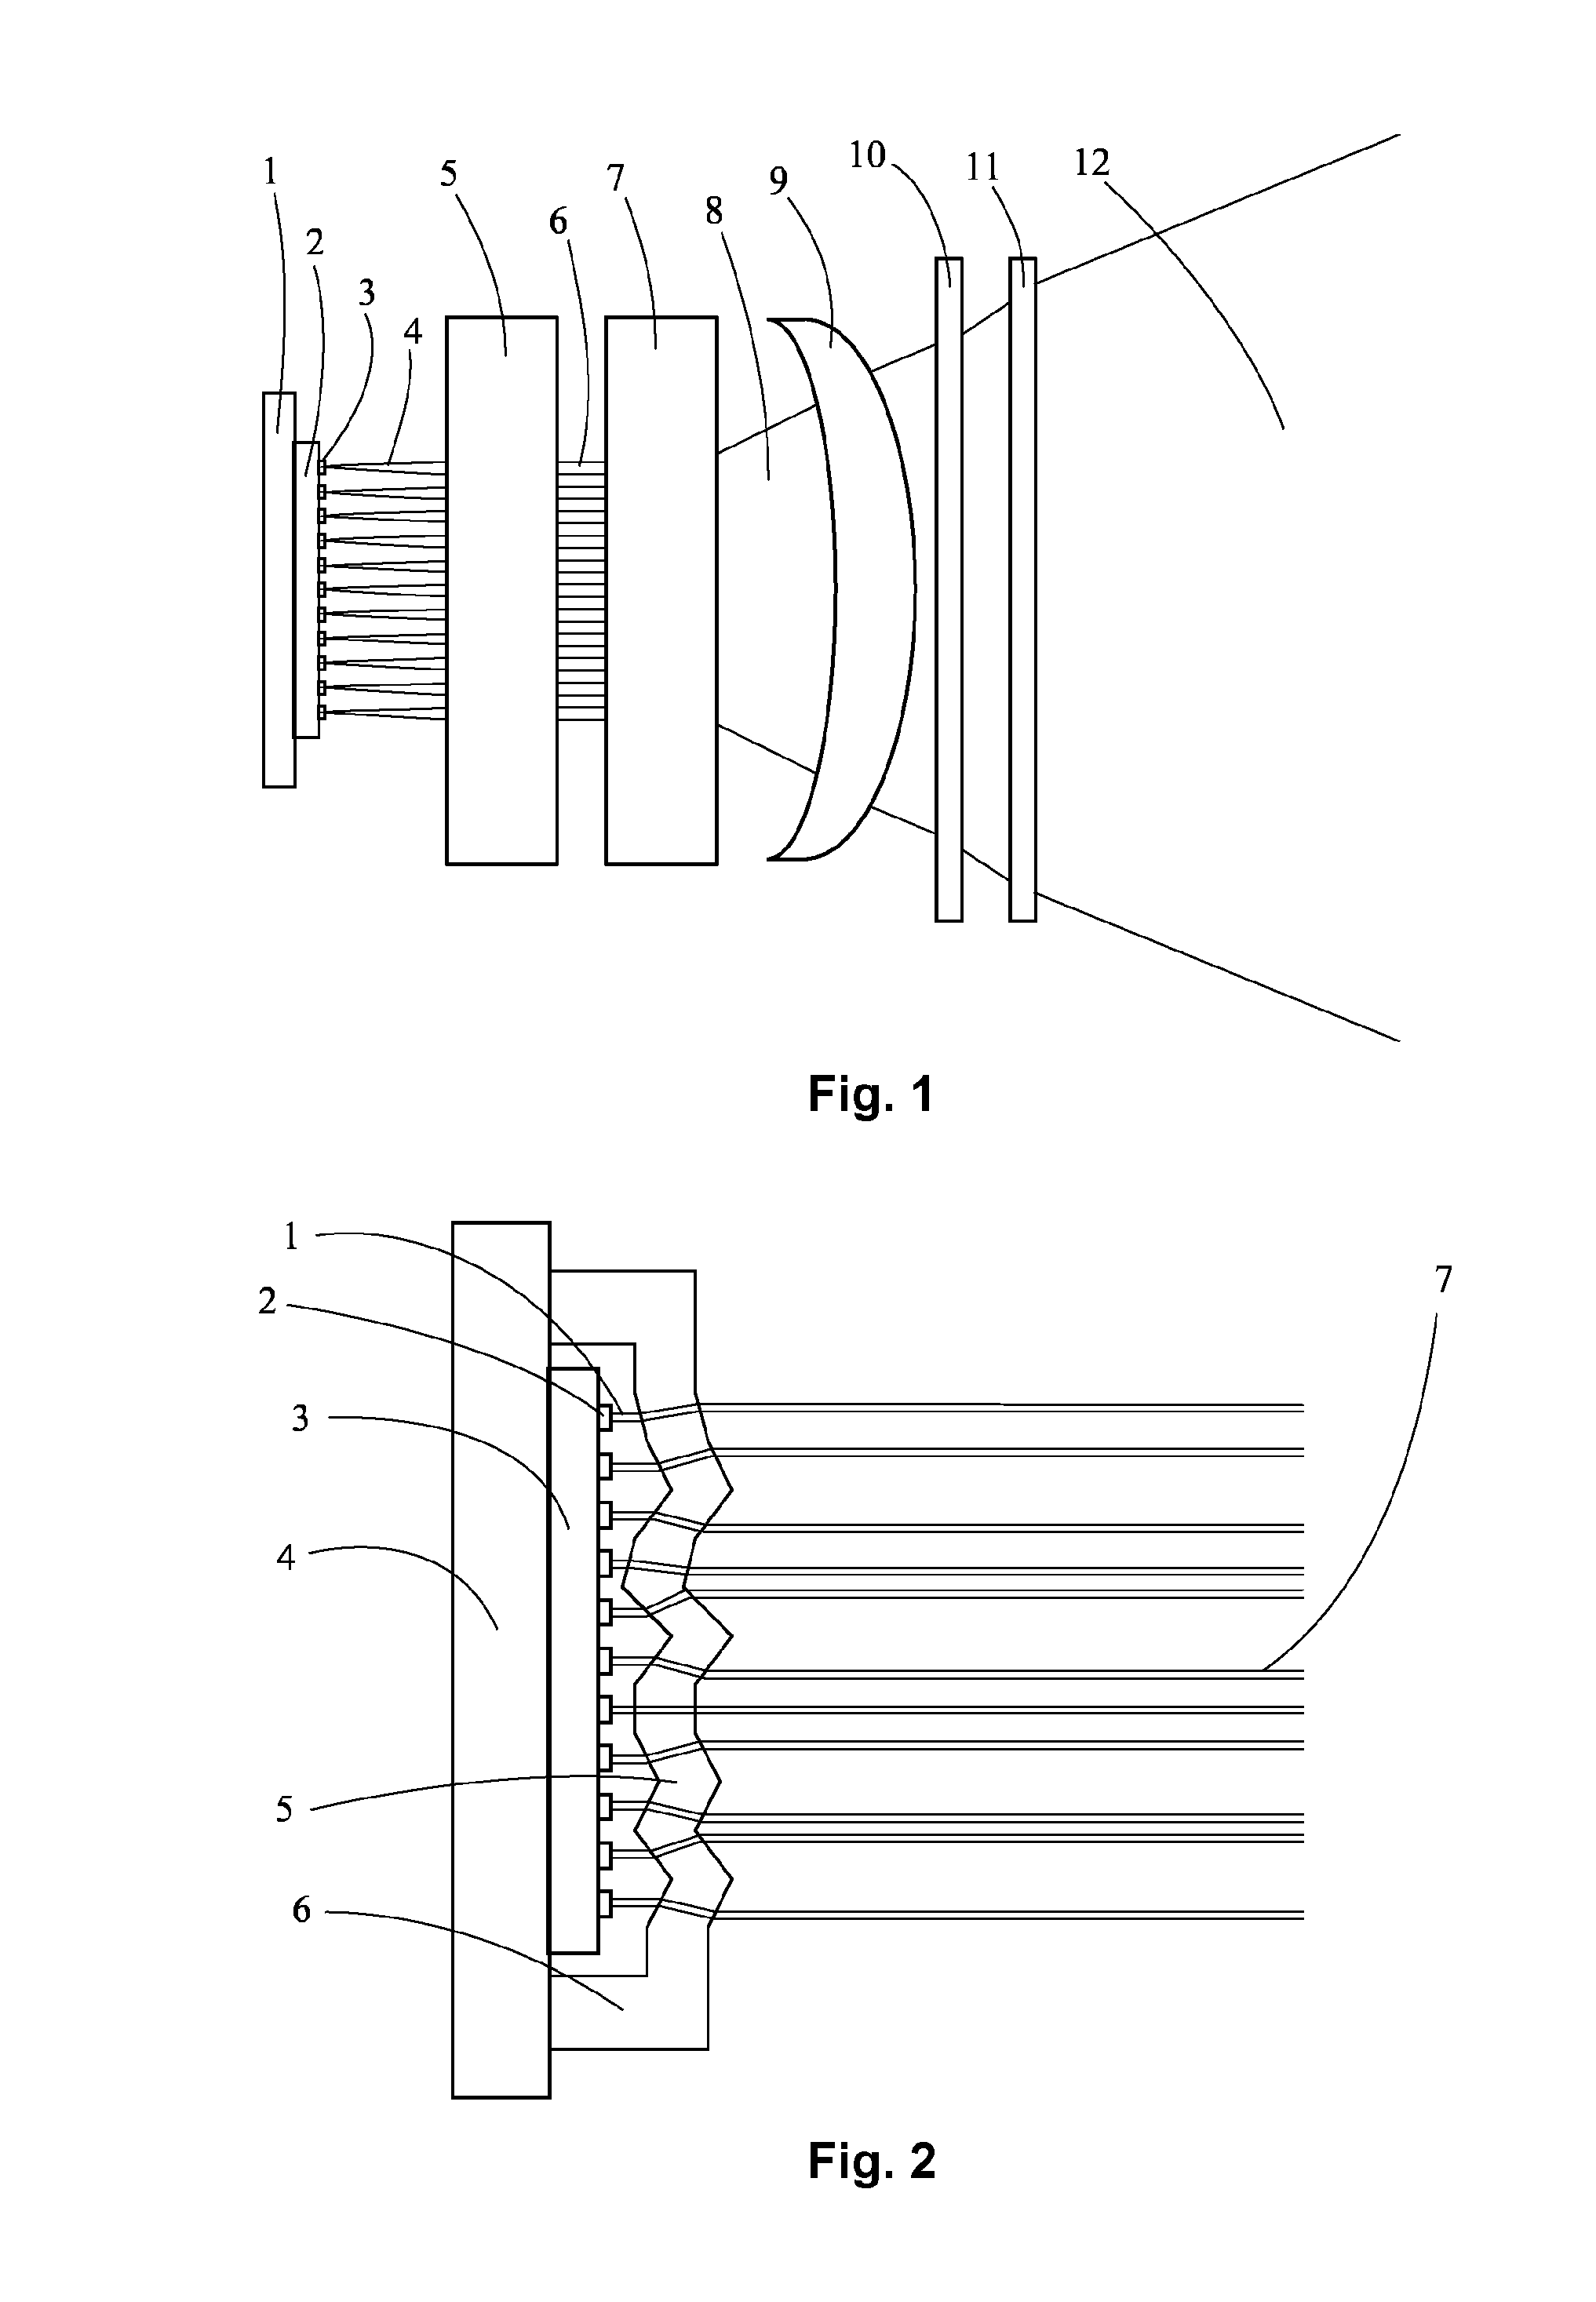 Optical system generating a structured light field from an array of light sources by means of a refracting or reflecting light structuring element